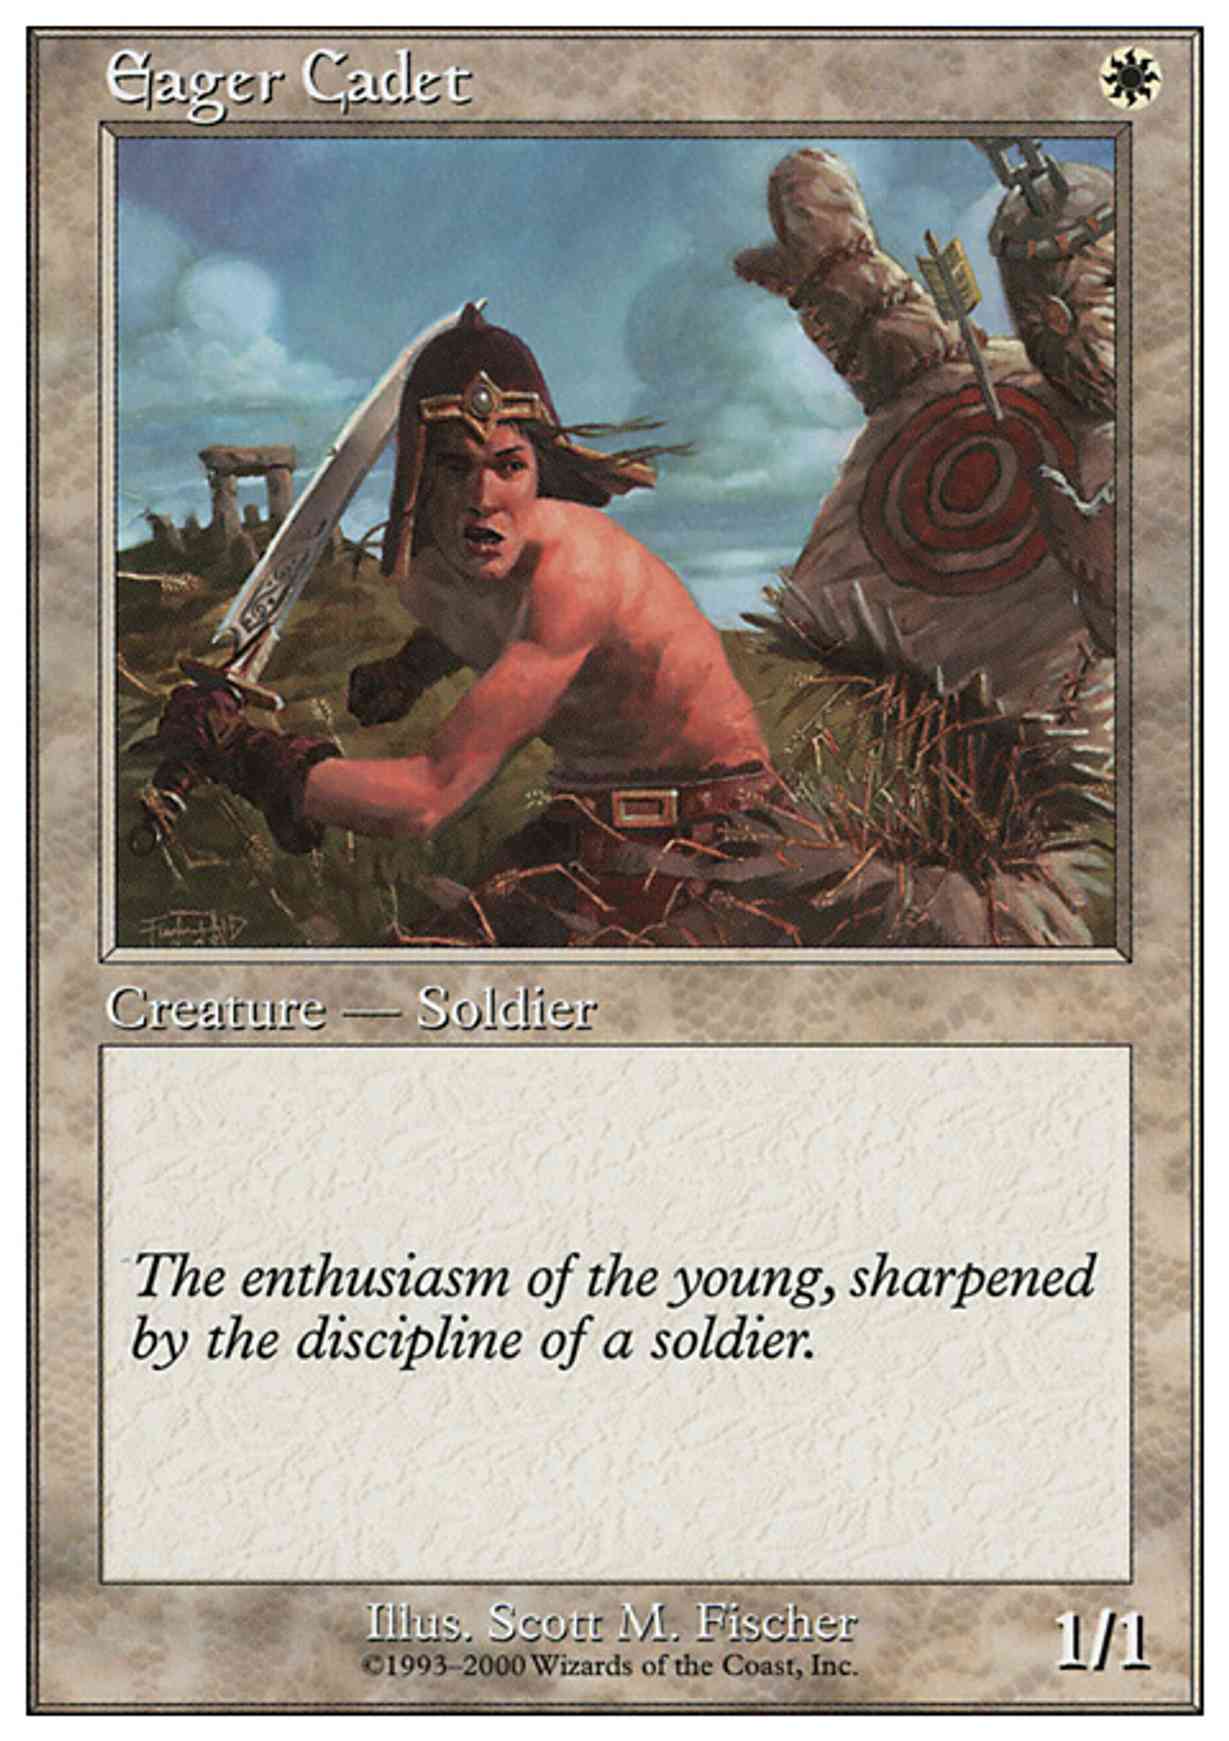 Eager Cadet magic card front